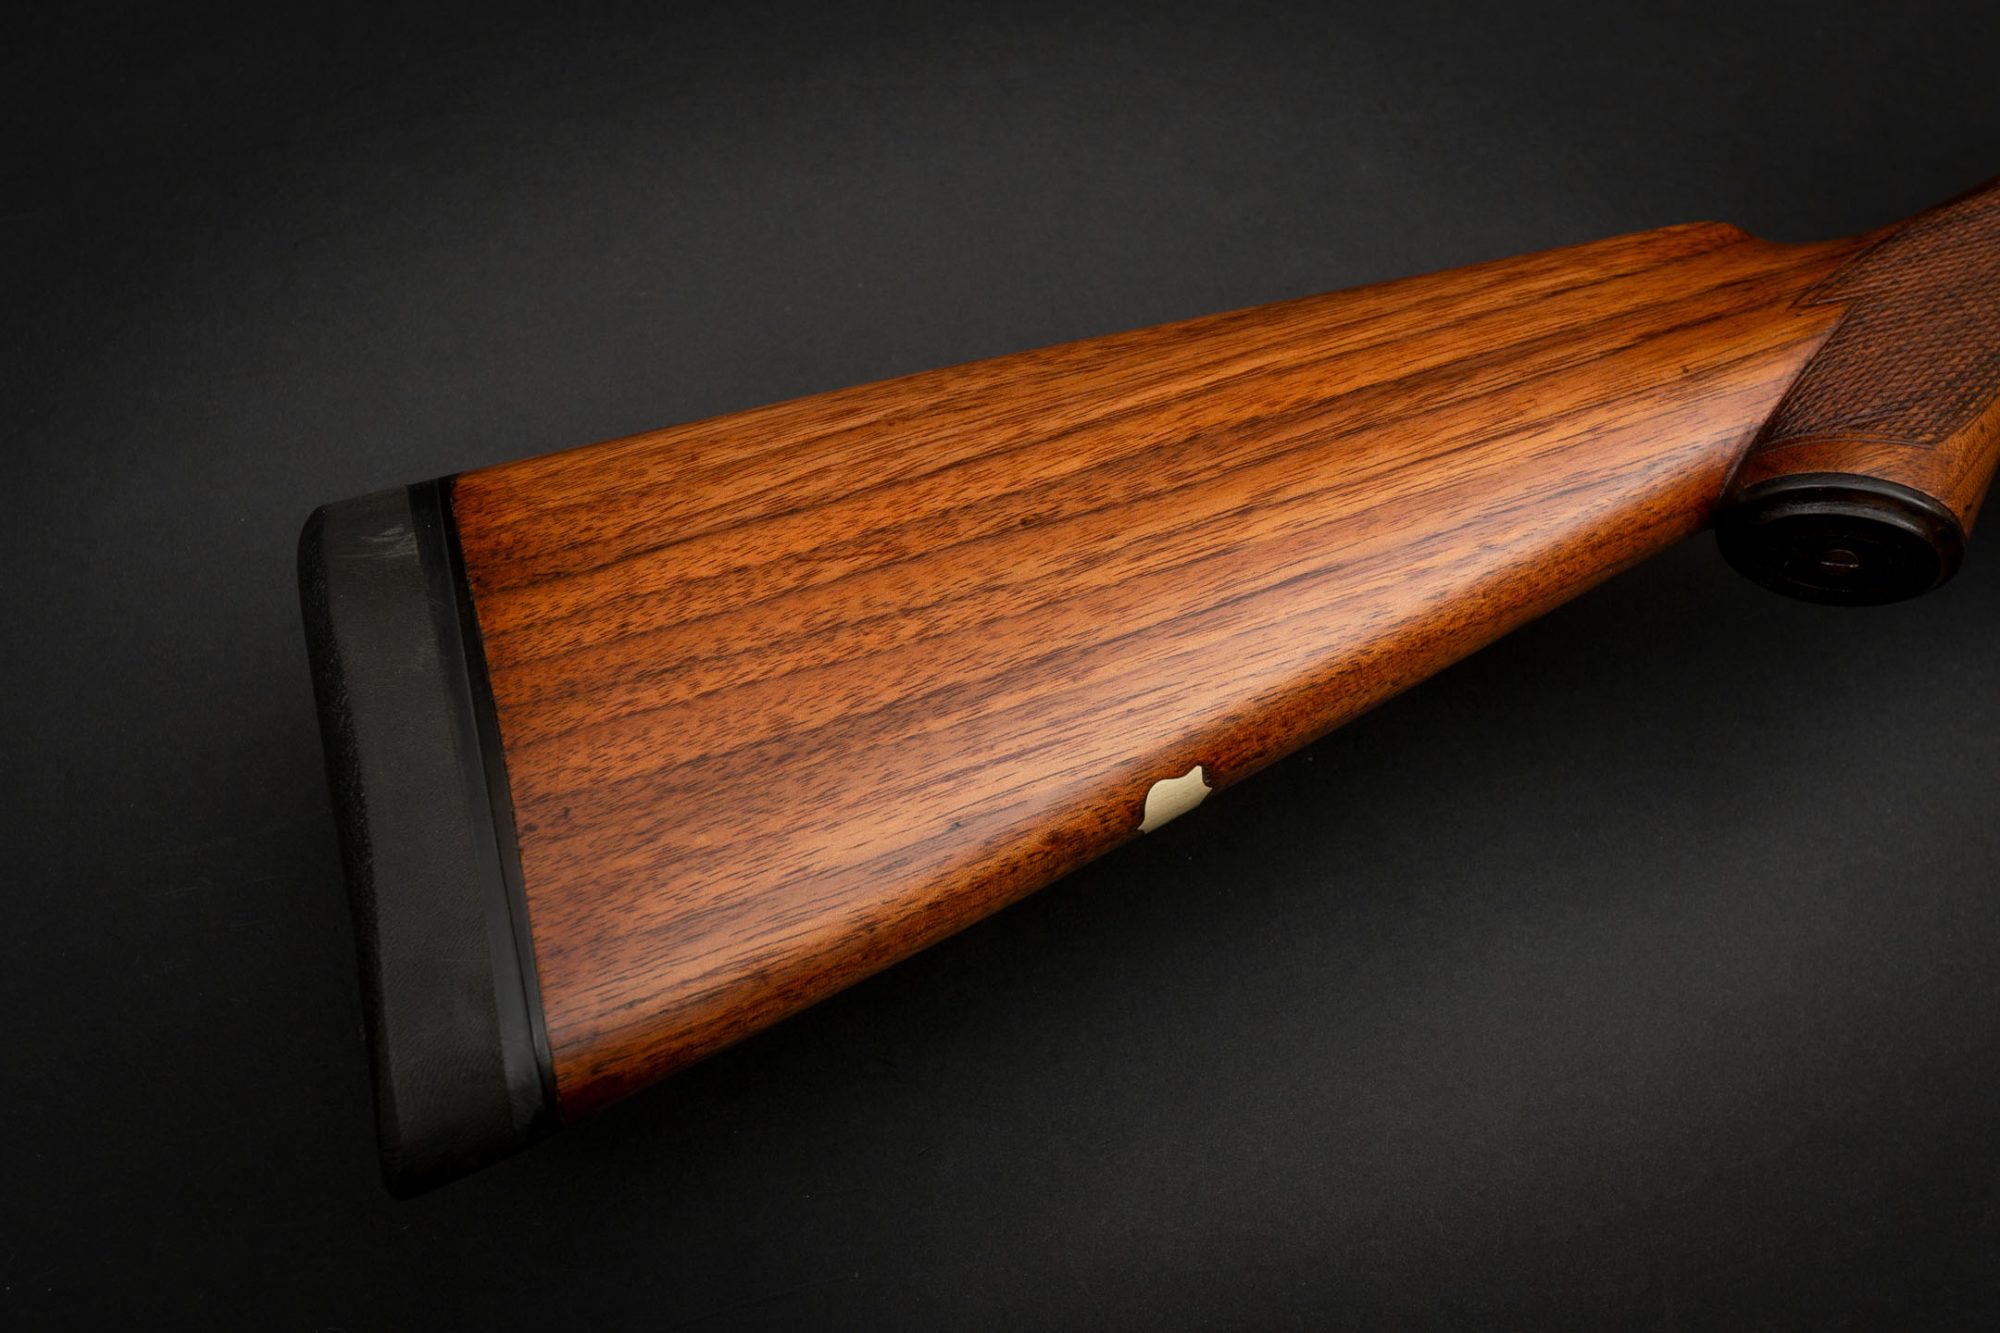 Parker VH 12 gauge side-by-side shotgun from 1923, for sale by Turnbull Restoration of Bloomfield, NY